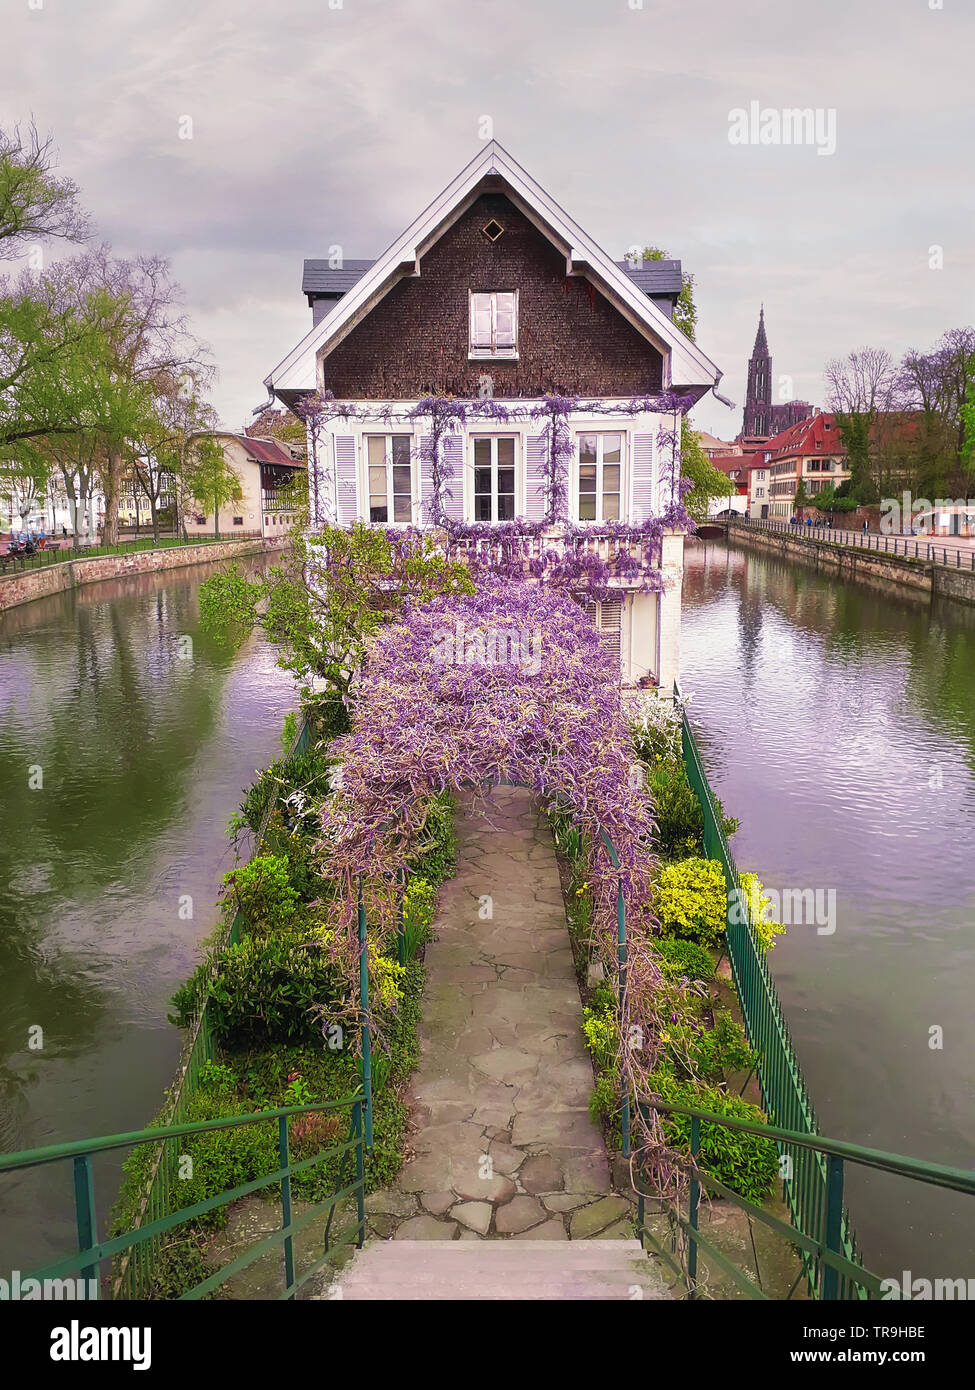 Wonderful purple flowering blue moon wine wisteria covering an arched arbor leading to an old house on a canal island in Petite France, Strasbourg, Al Stock Photo